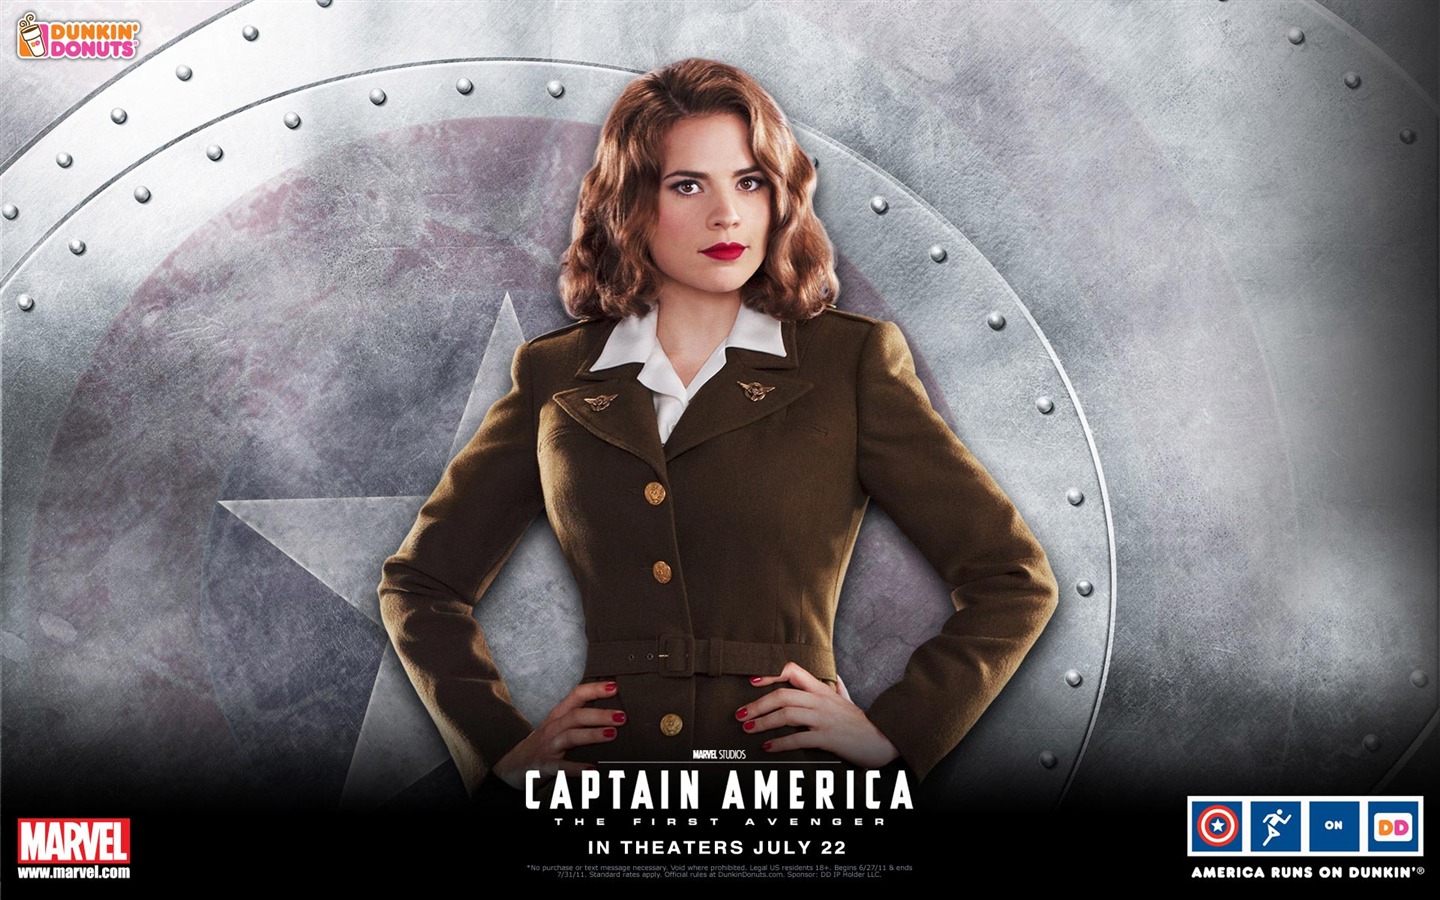 Captain America: The First Avenger wallpapers HD #8 - 1440x900